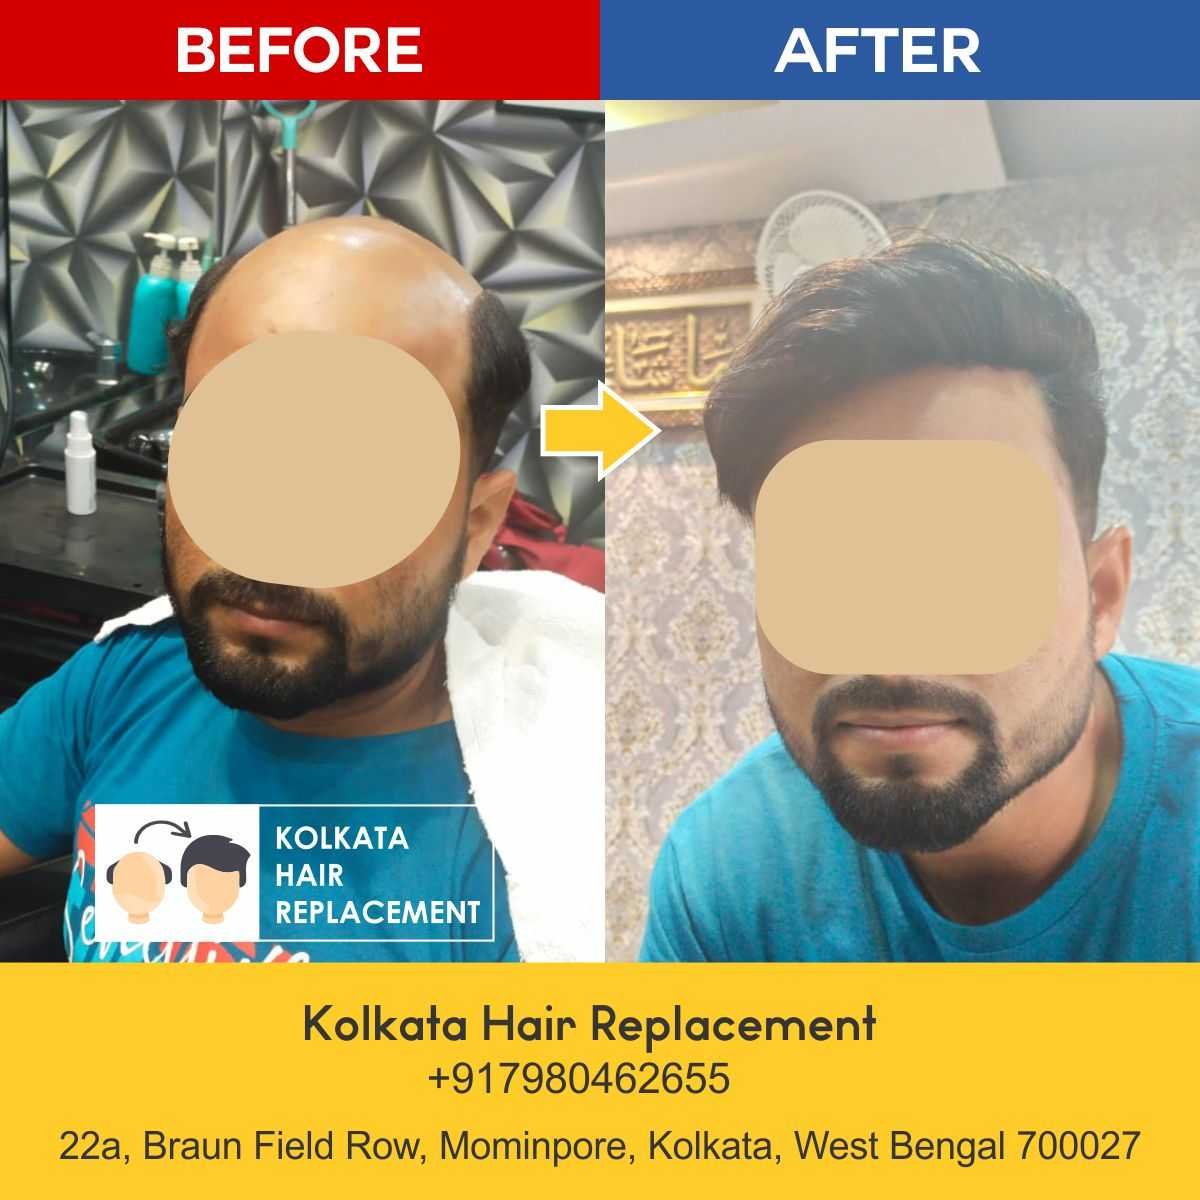 men-hair-wig-patch-kolkata-hair-replacement-before-after-07